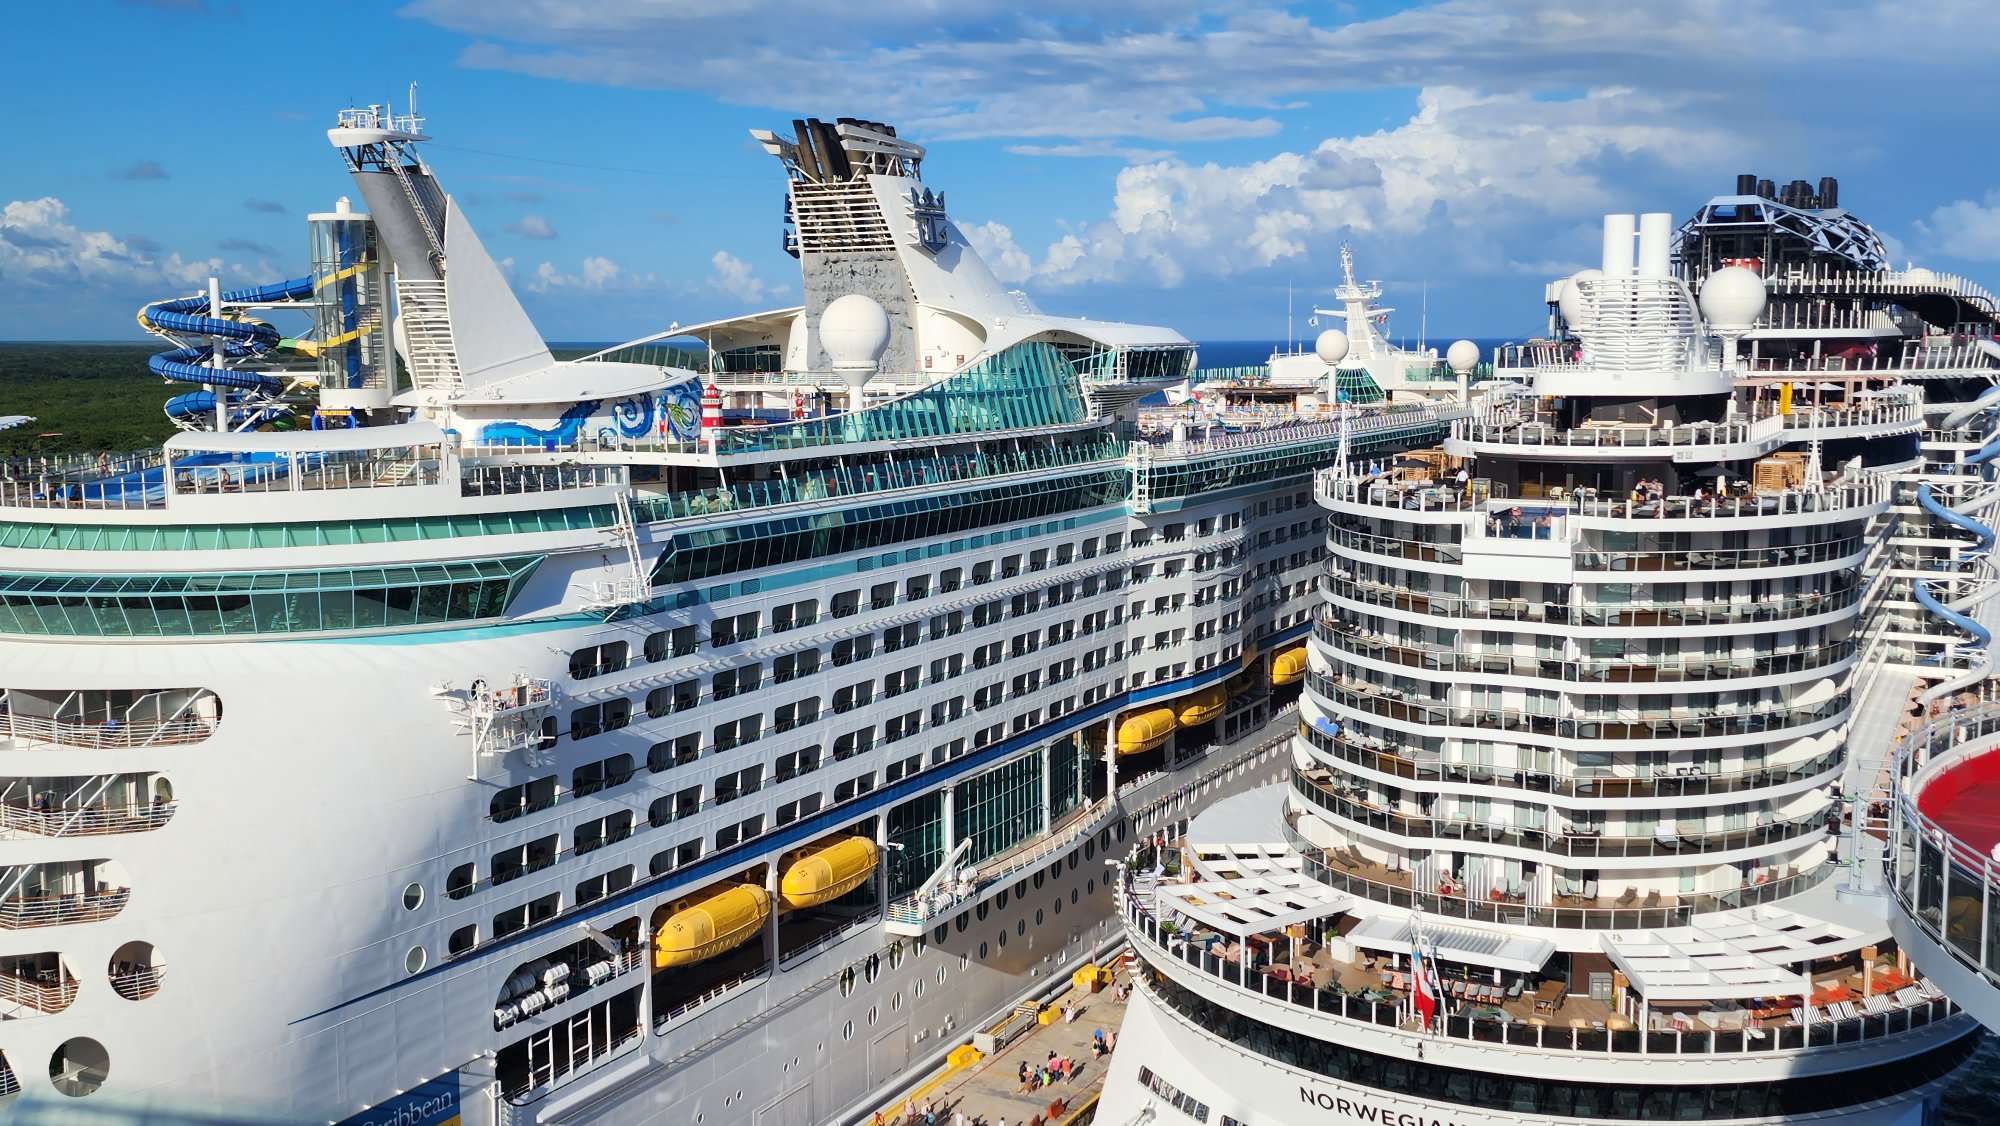 two cruise ships docked in port: Royal Caribbean and MSC Cruises